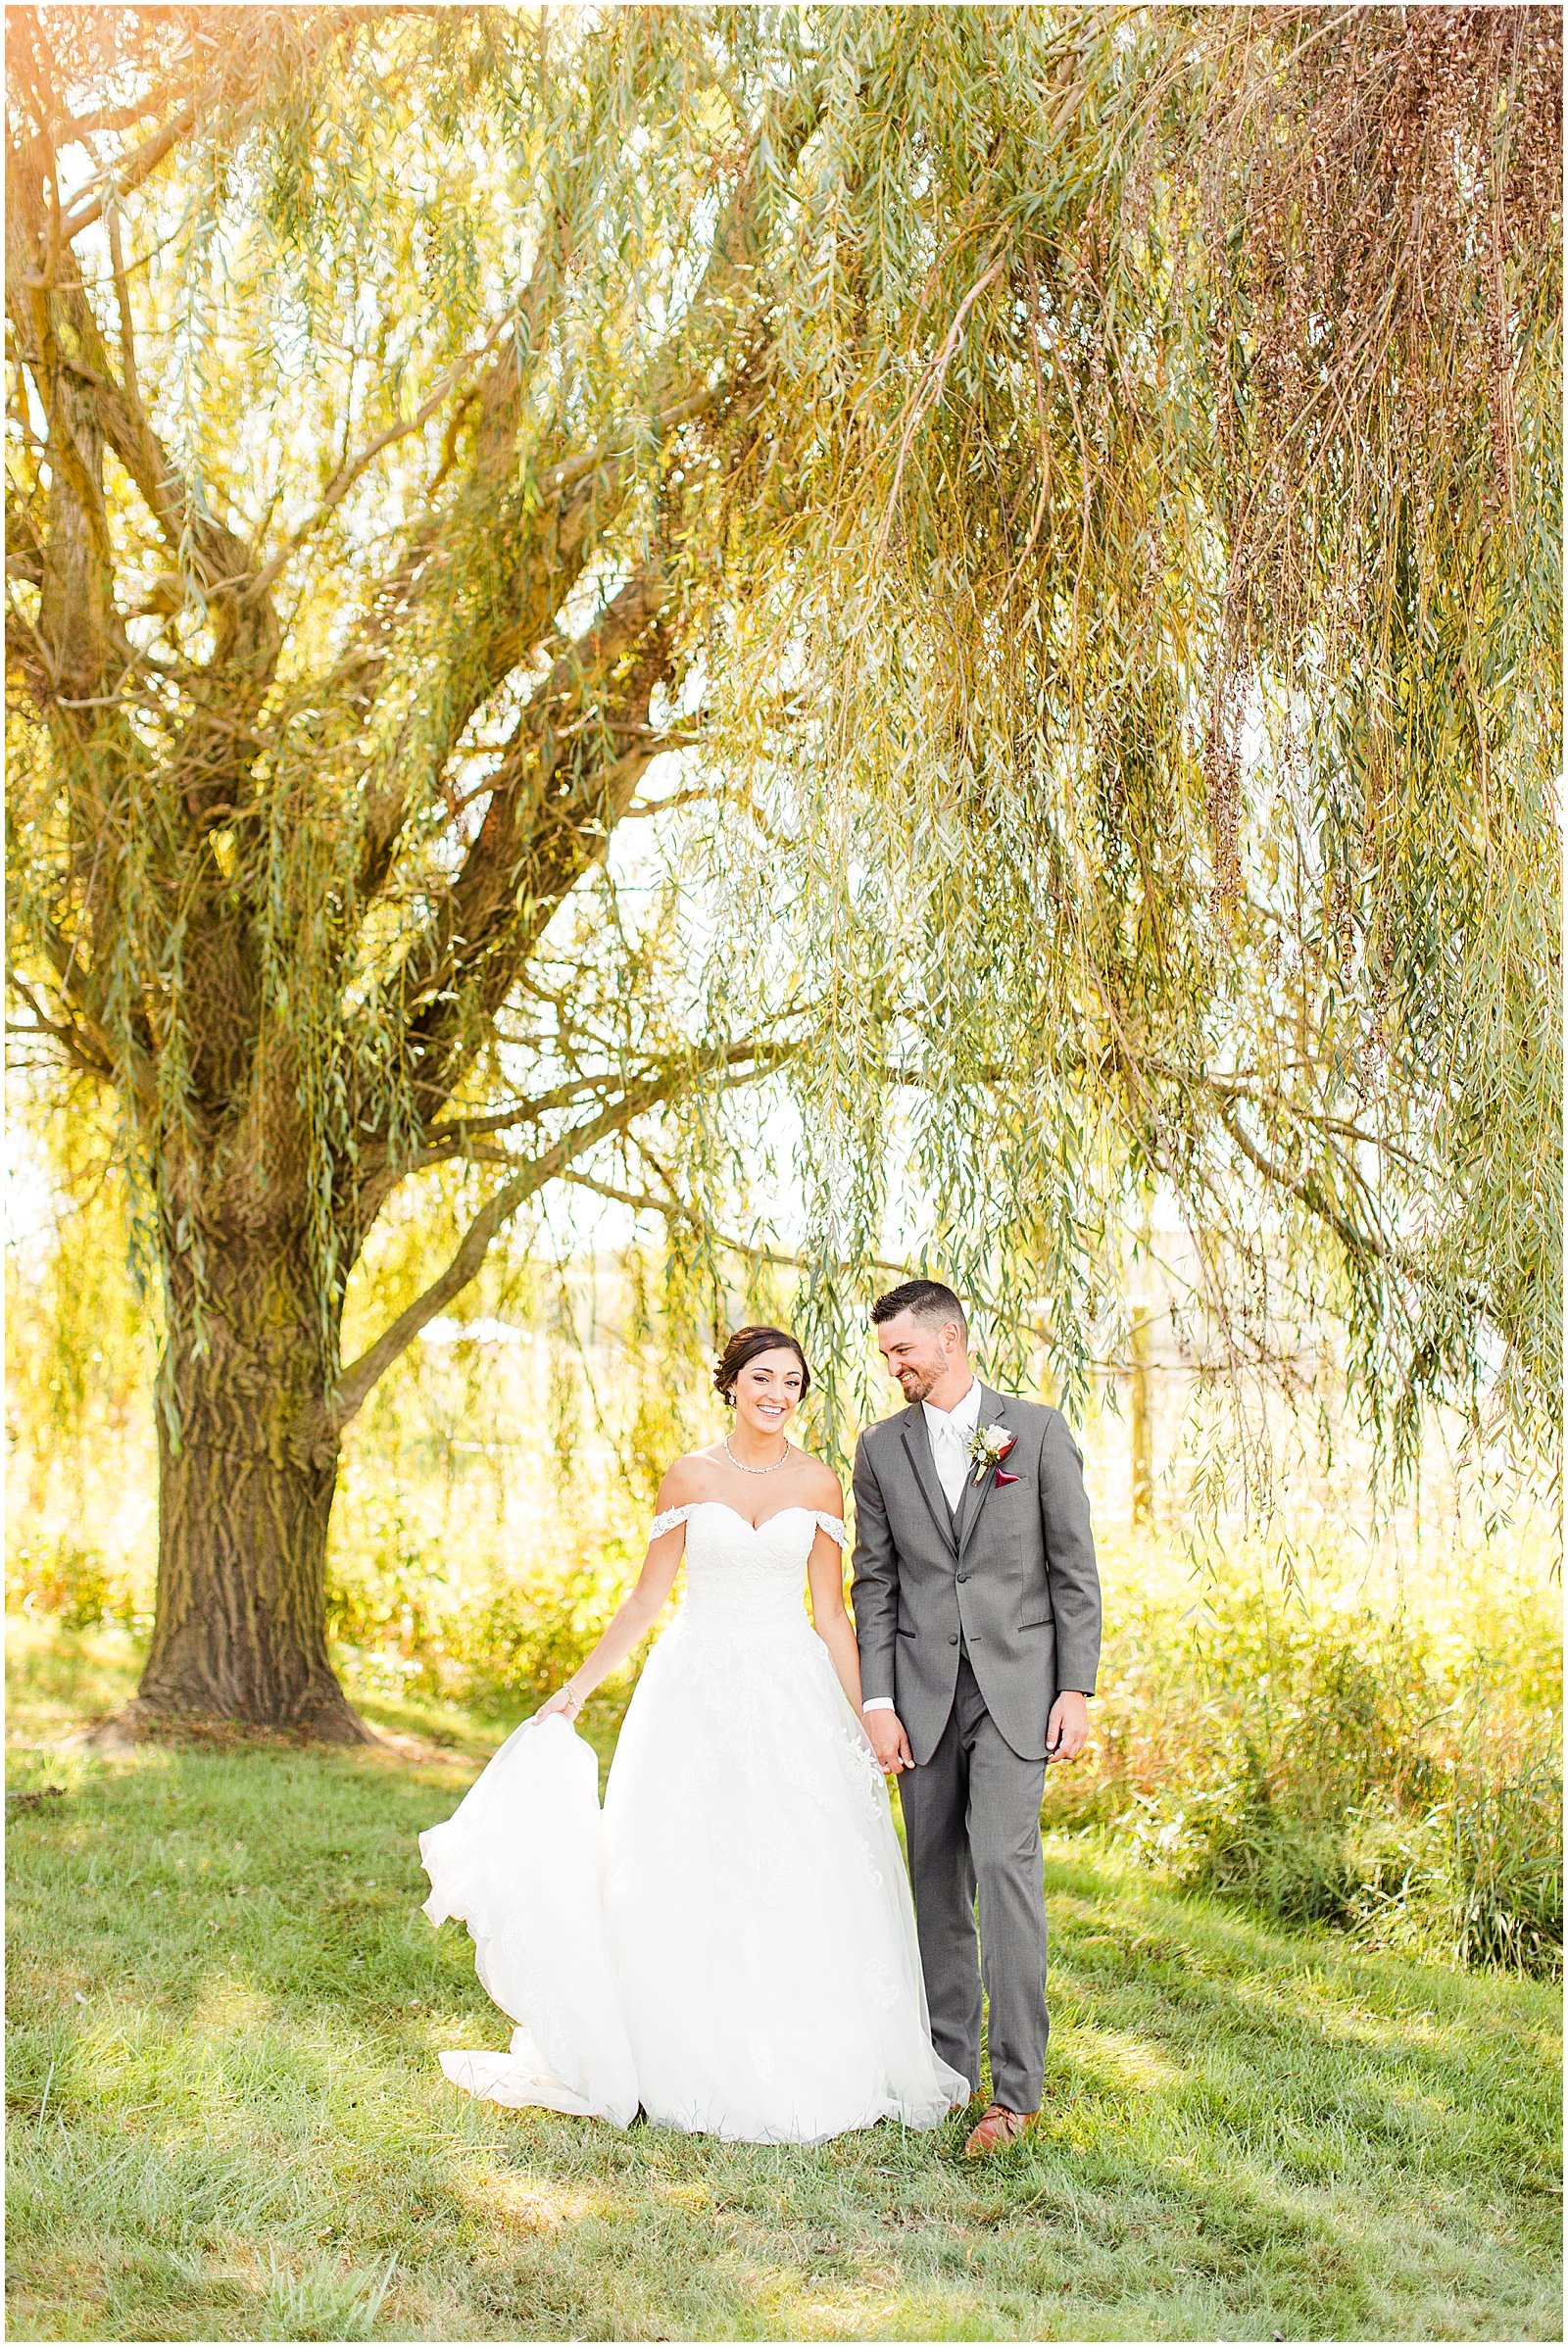 A Stunning Fall Wedding in Indianapolis, IN |. Sally and Andrew | Bret and Brandie Photography 0071.jpg